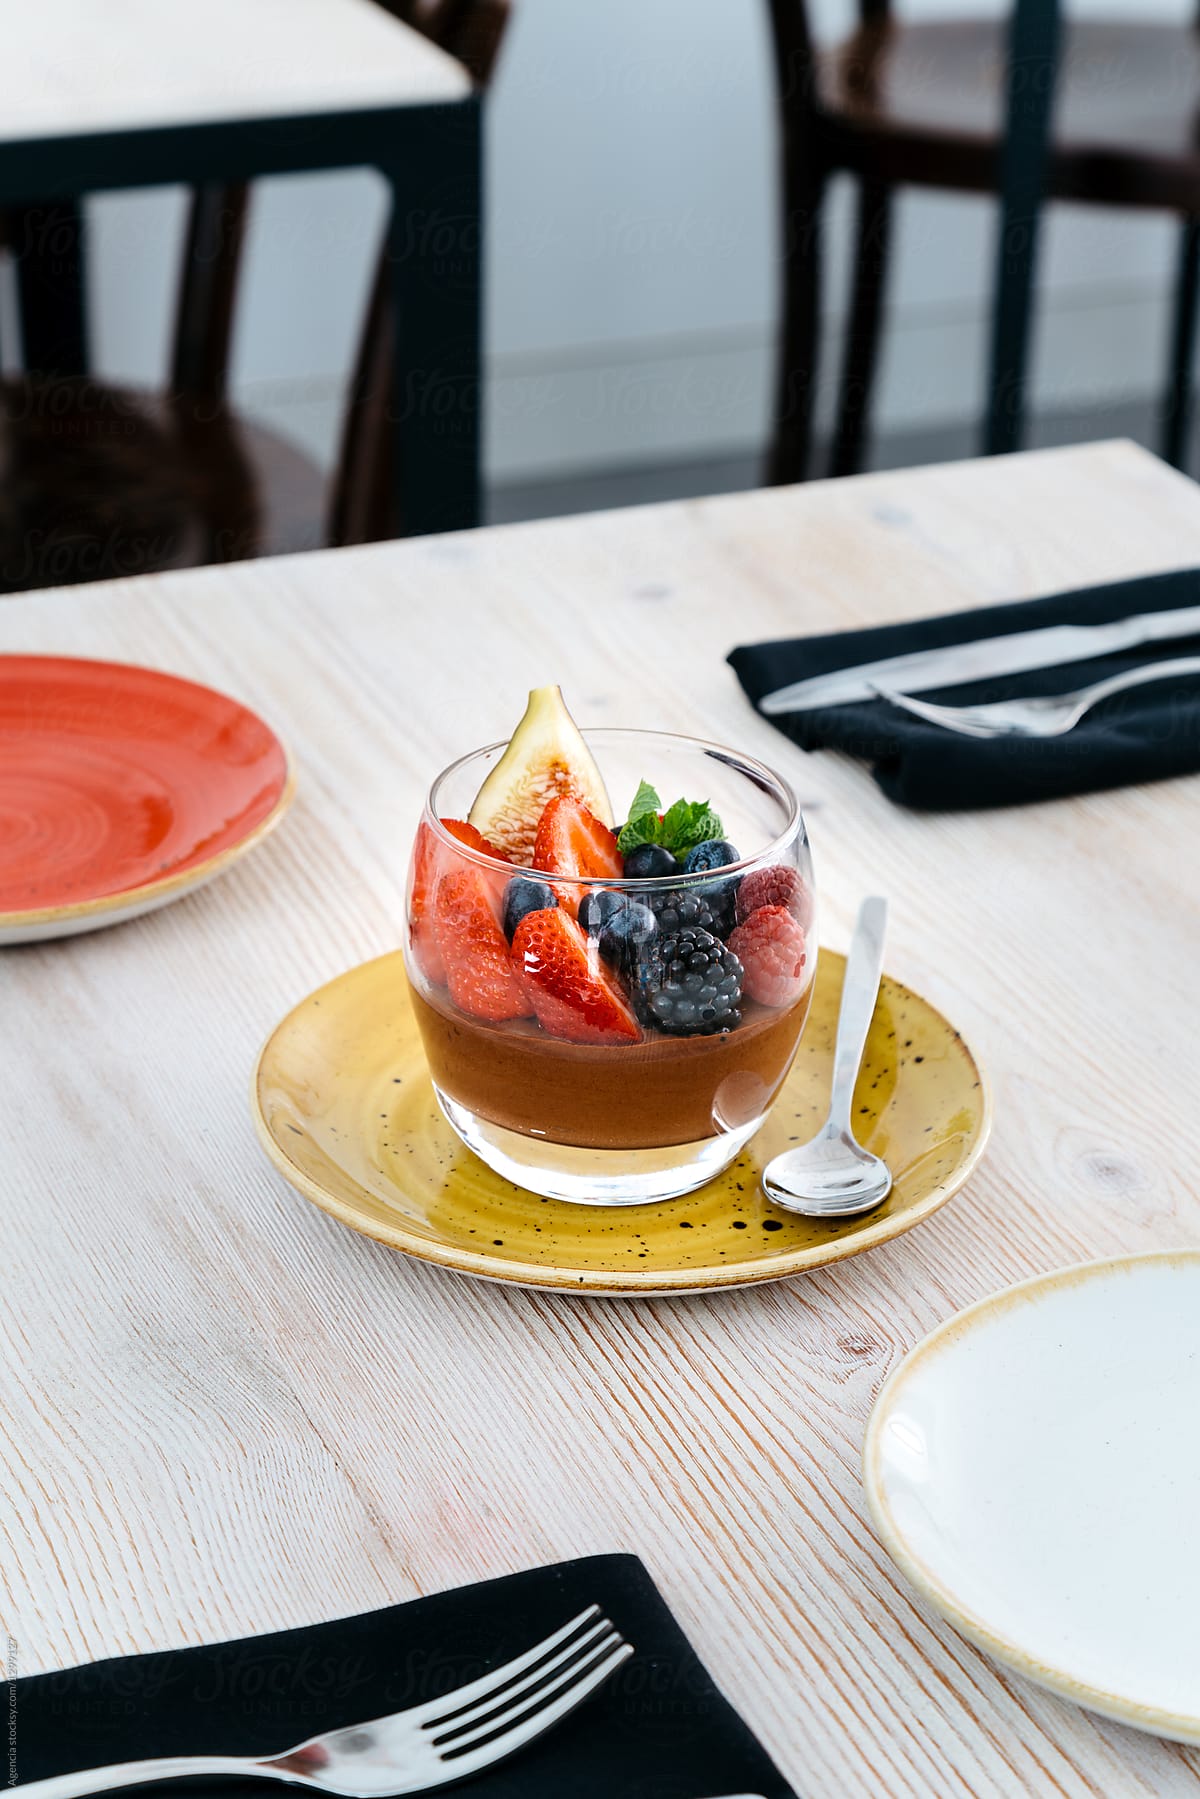 Chocolate Mouse with Forest Fruits serves in a Glass